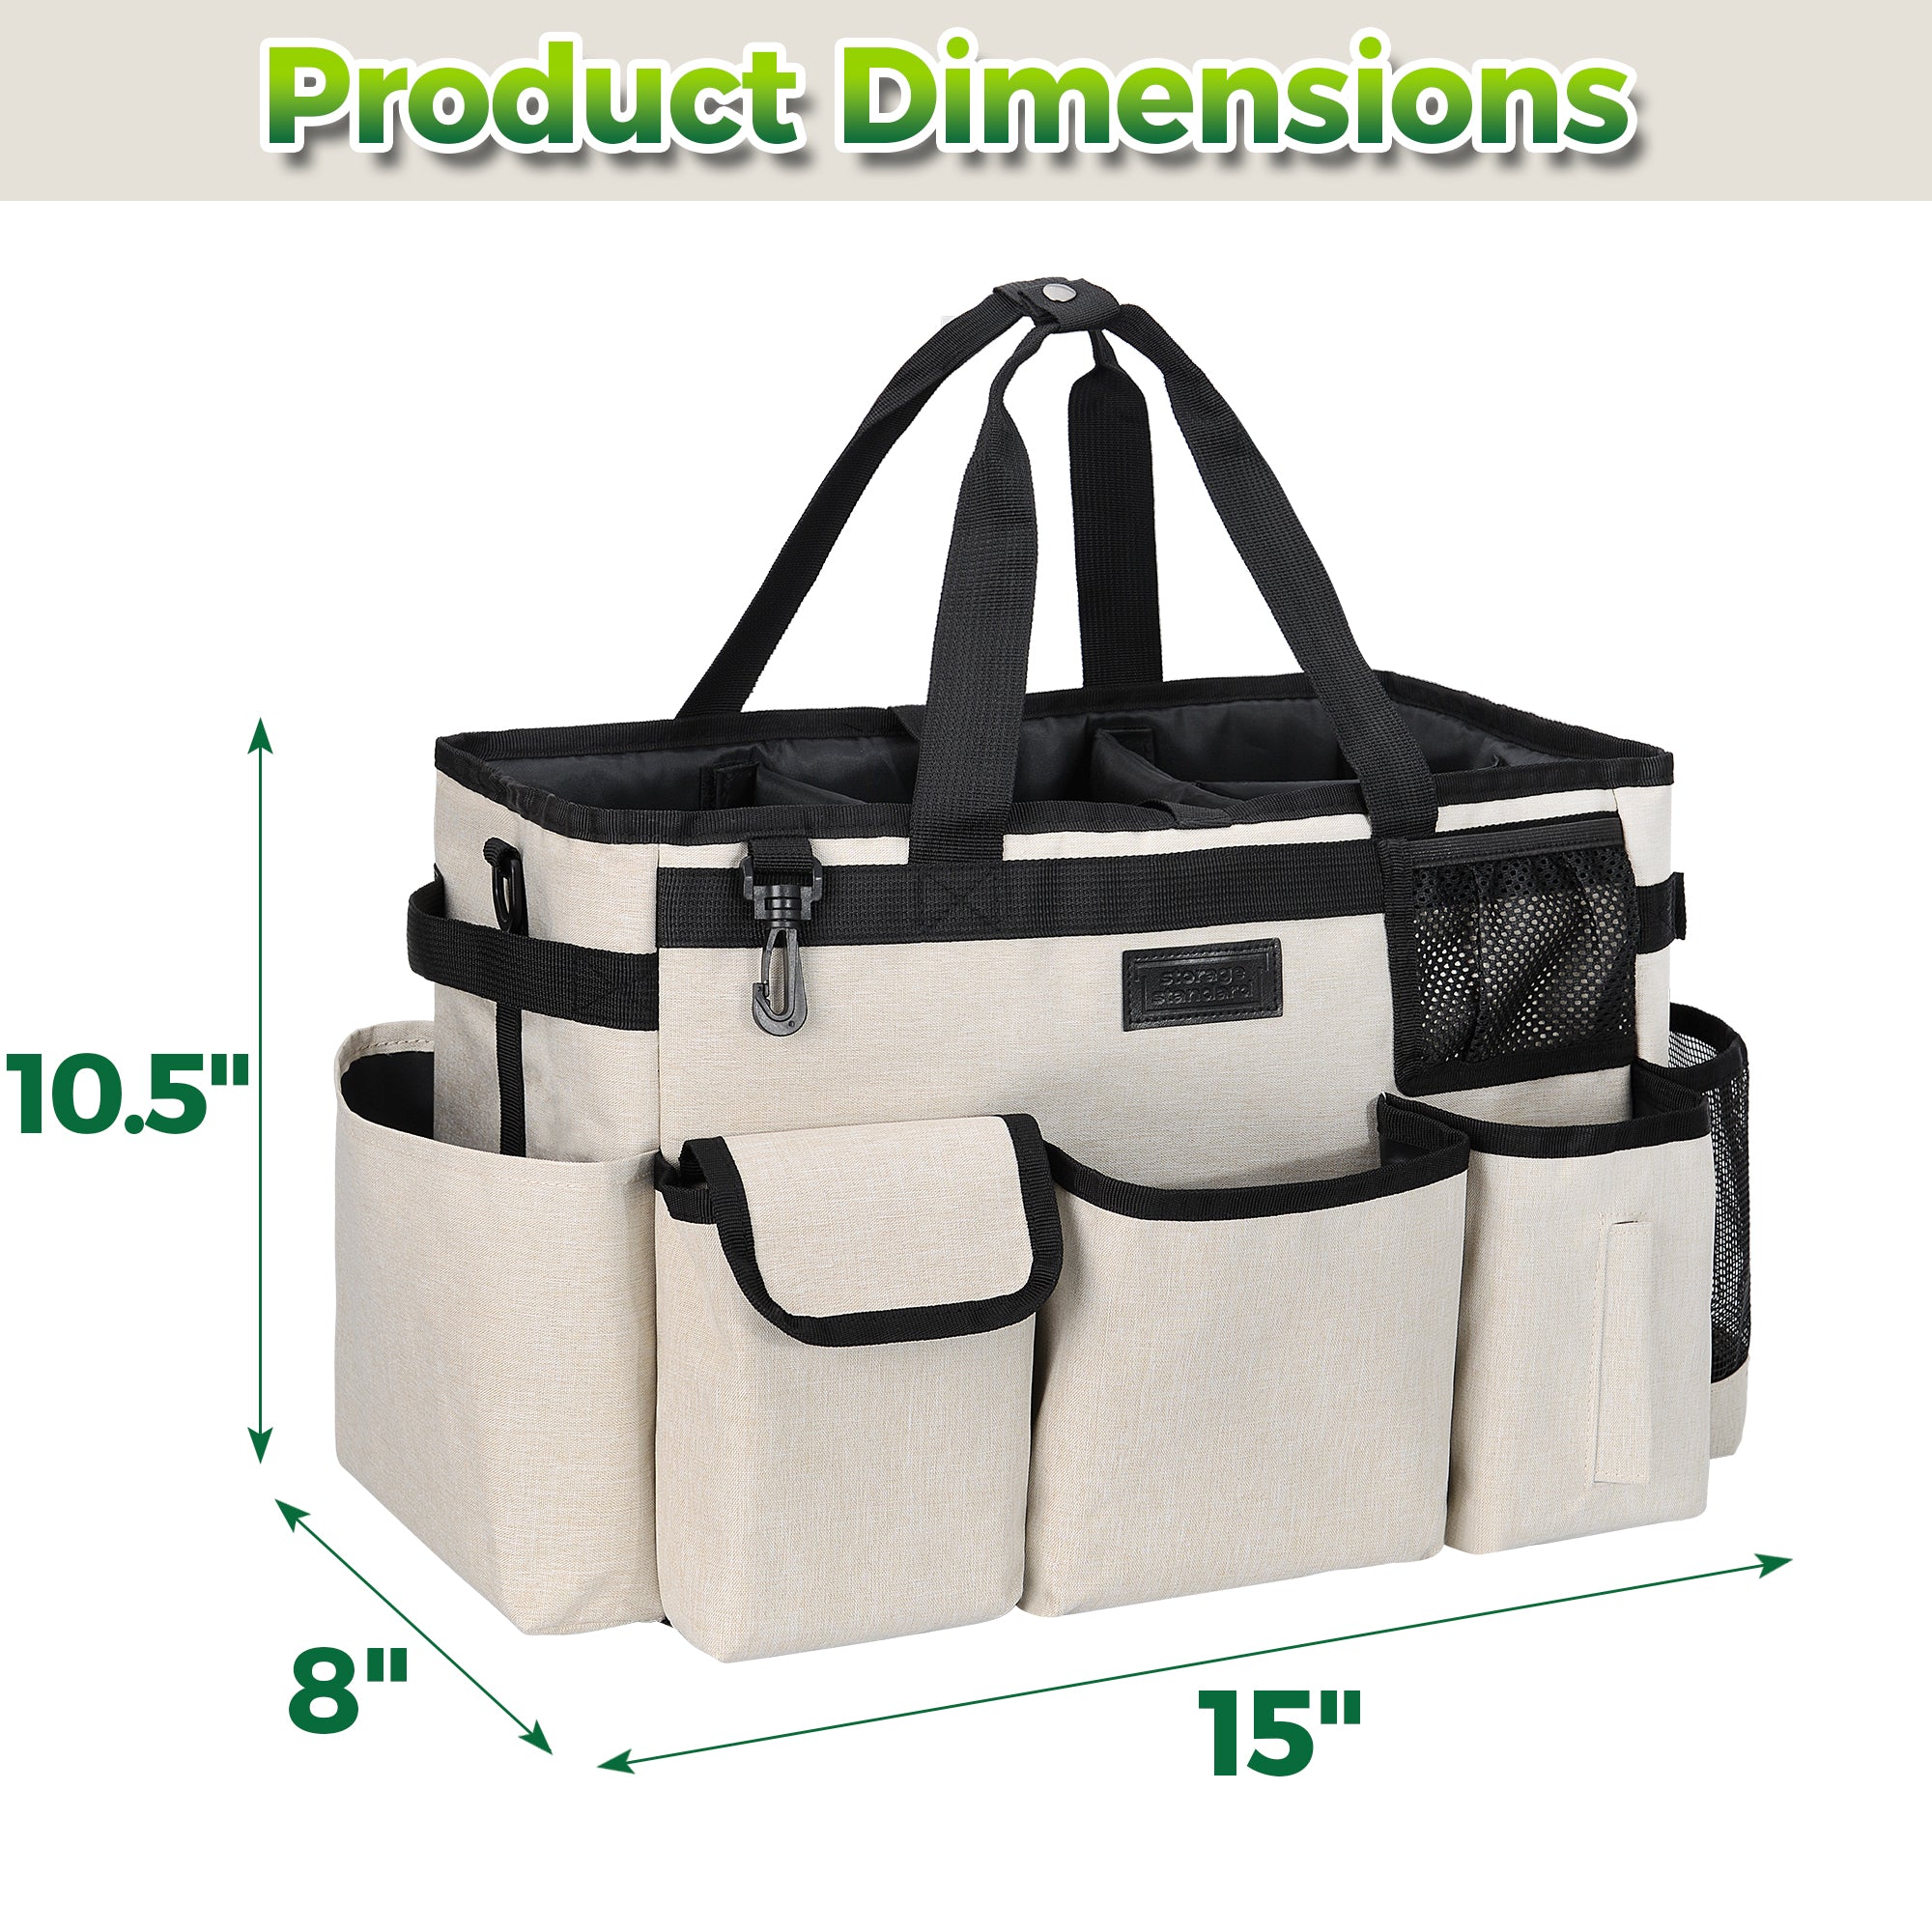 Wearable Cleaning Caddy Bag,Cleaning Supply Tote for Cleaning Supplies,  Cleaning